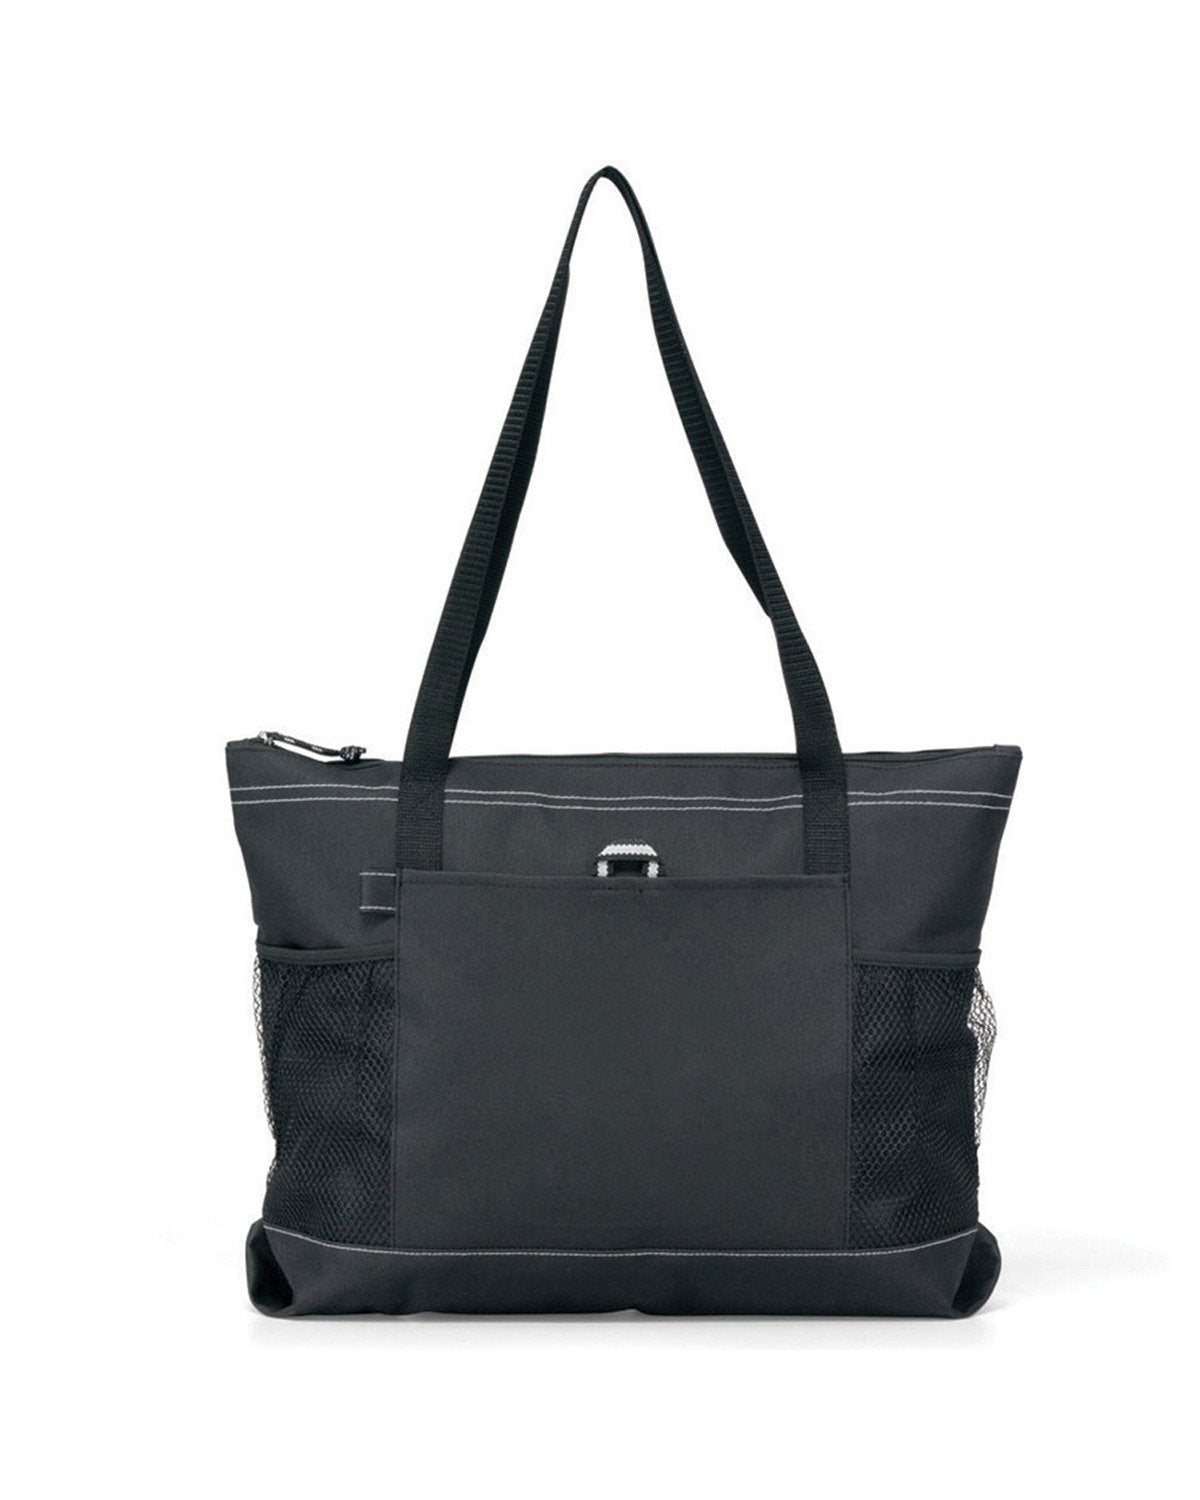 Bags and Accessories BLACK OS Gemline